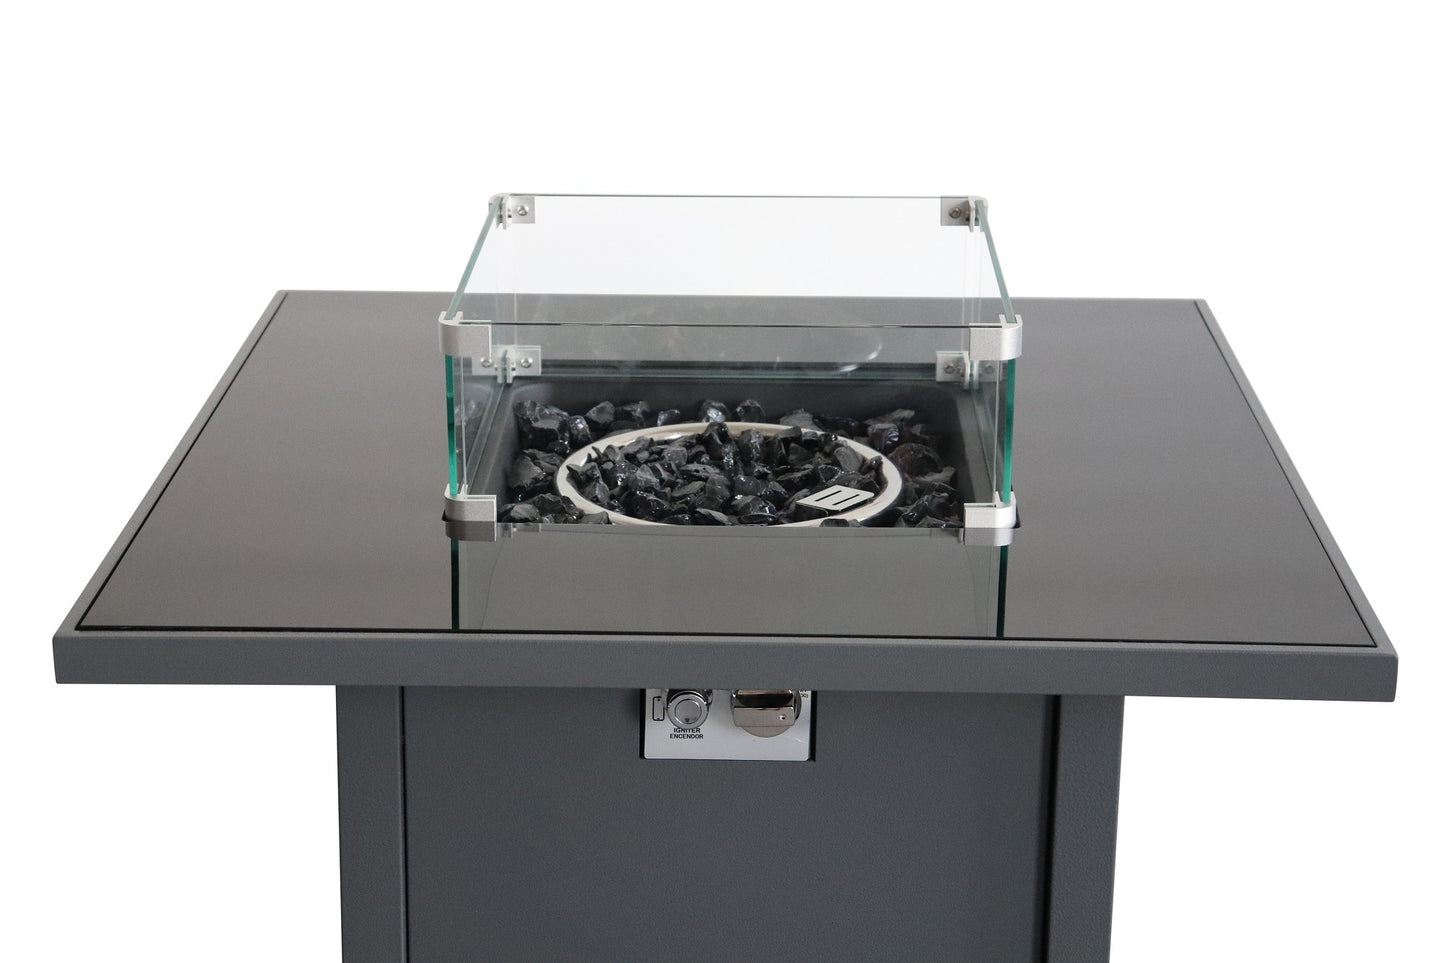 Outdoor Steel Fire Pit Table with Lid - Modern Design and Convenience